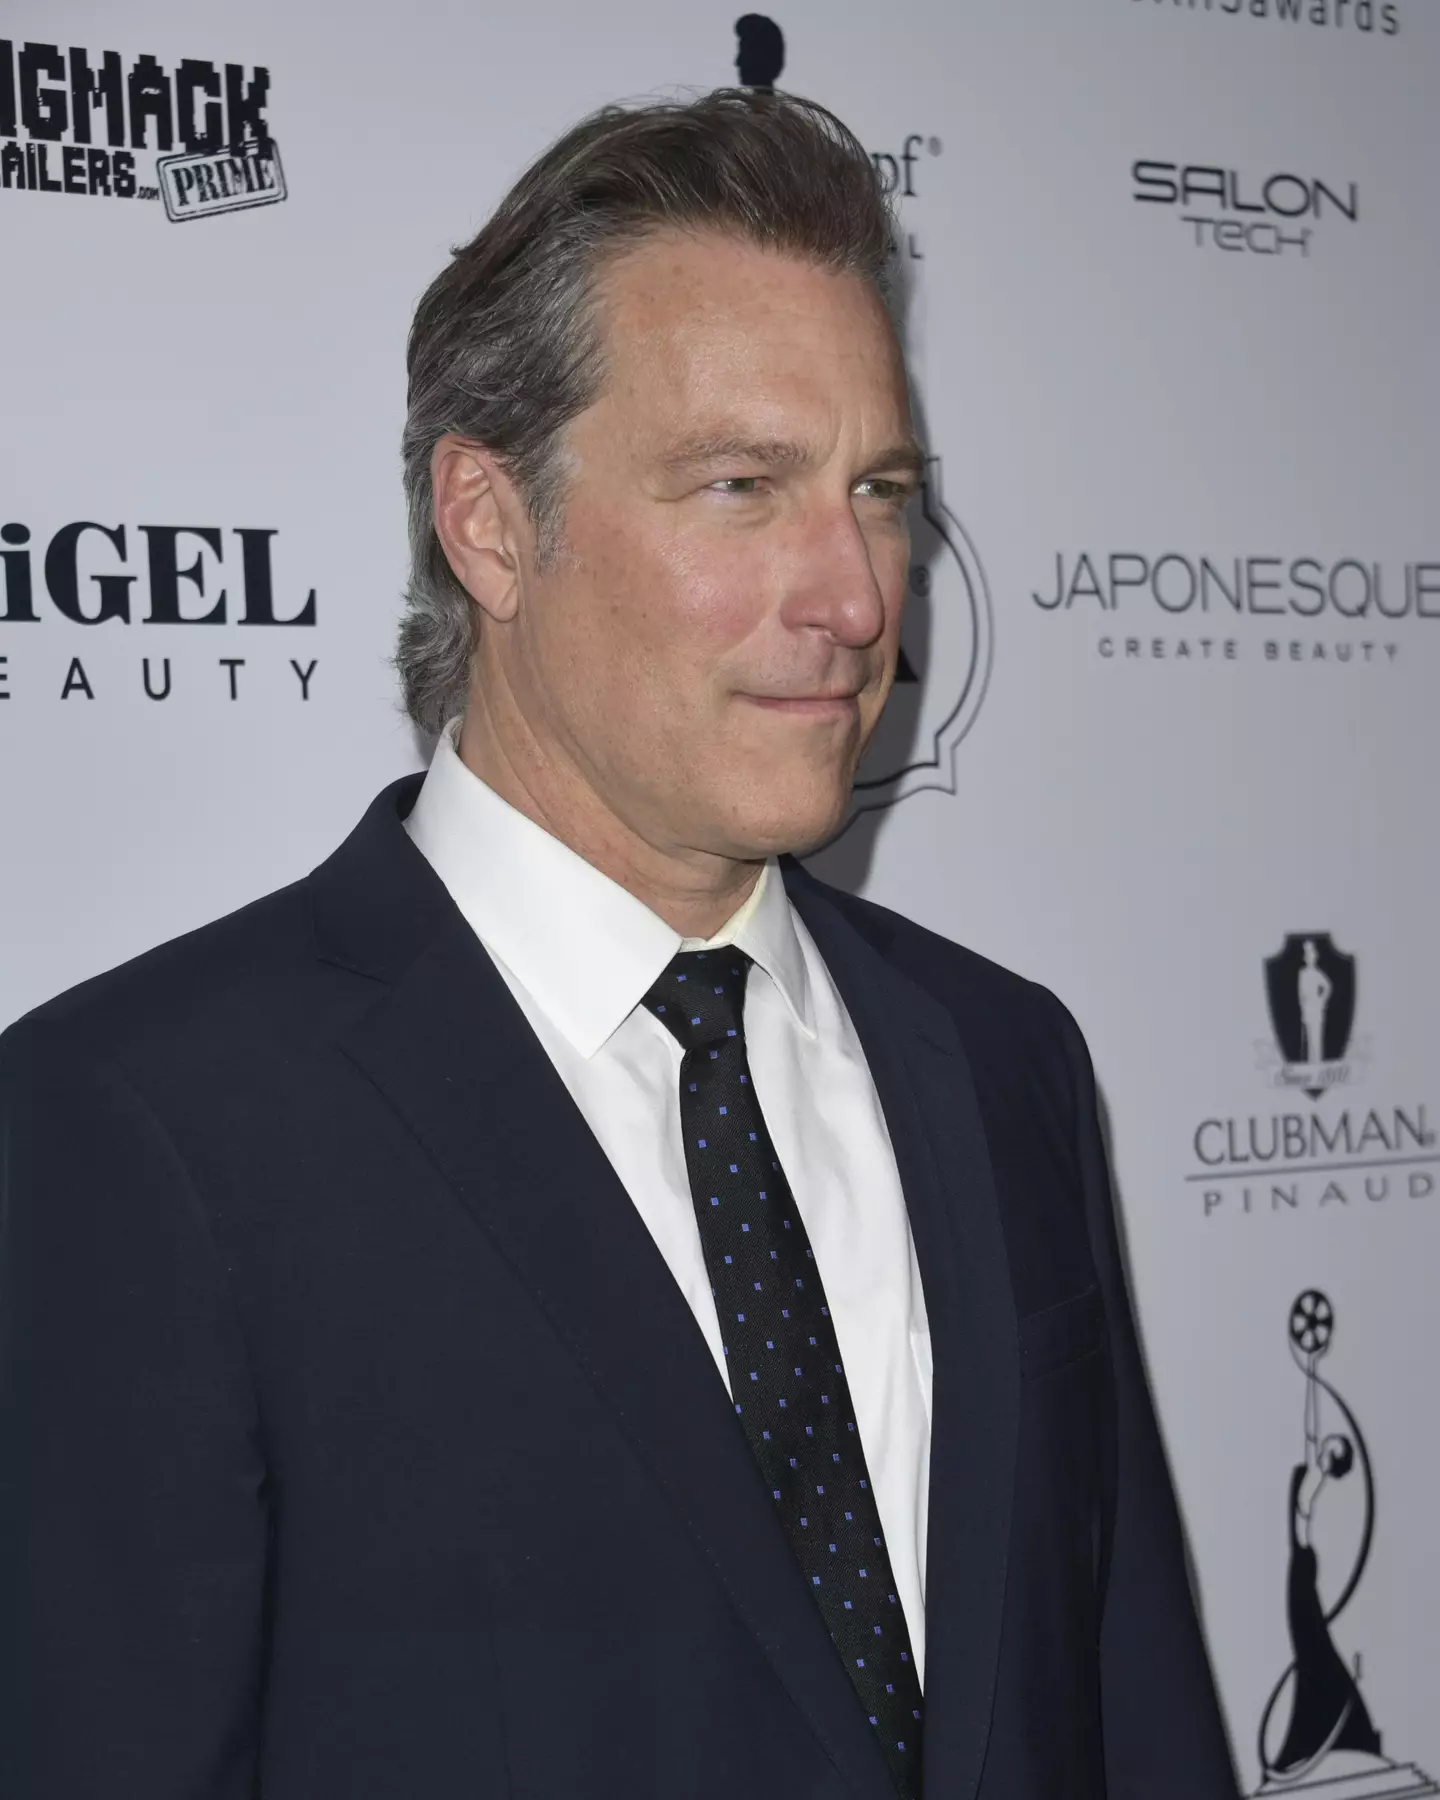 John Corbett has been confirmed to join the cast of And Just Like That...as Aidan Shaw.